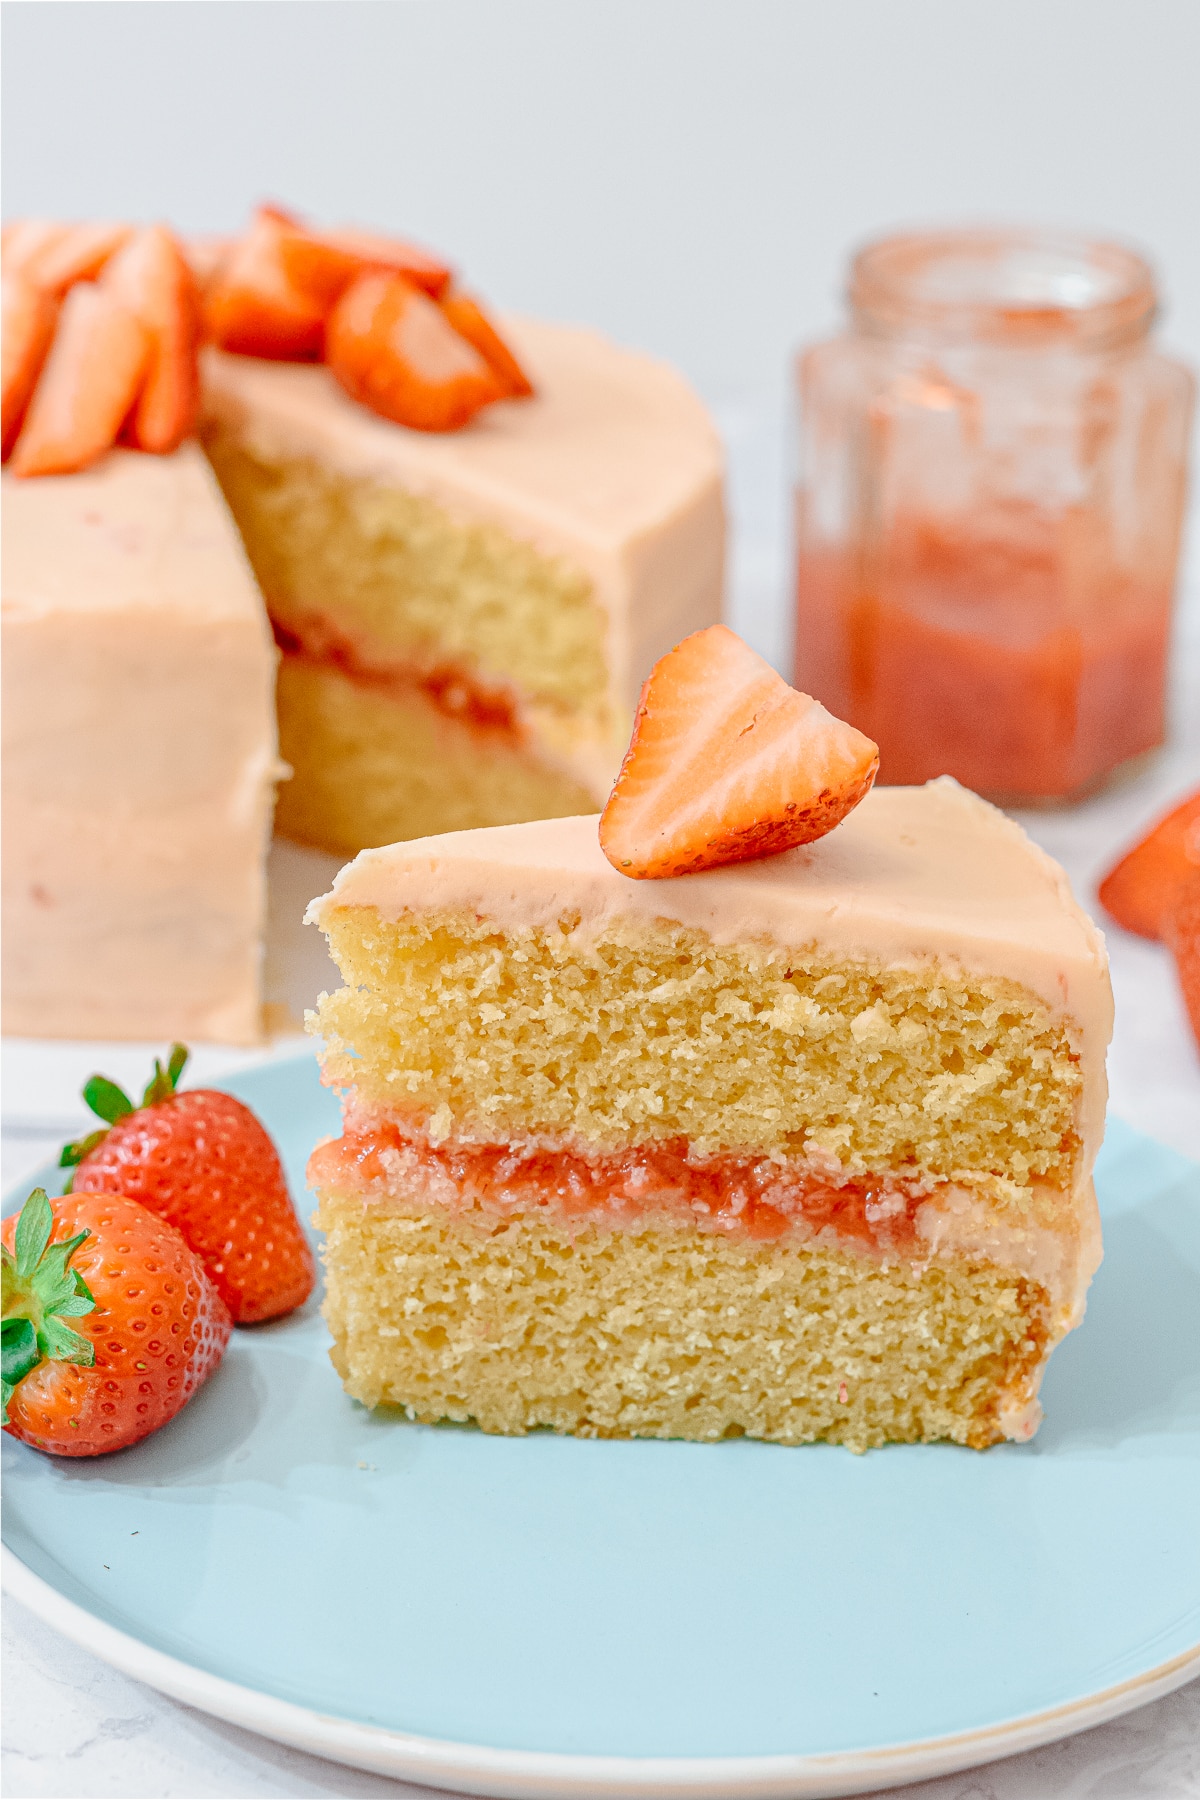 A slice of strawberry vanilla layer cake showing homemade strawberry cake filling between the layers and topped with strawberries